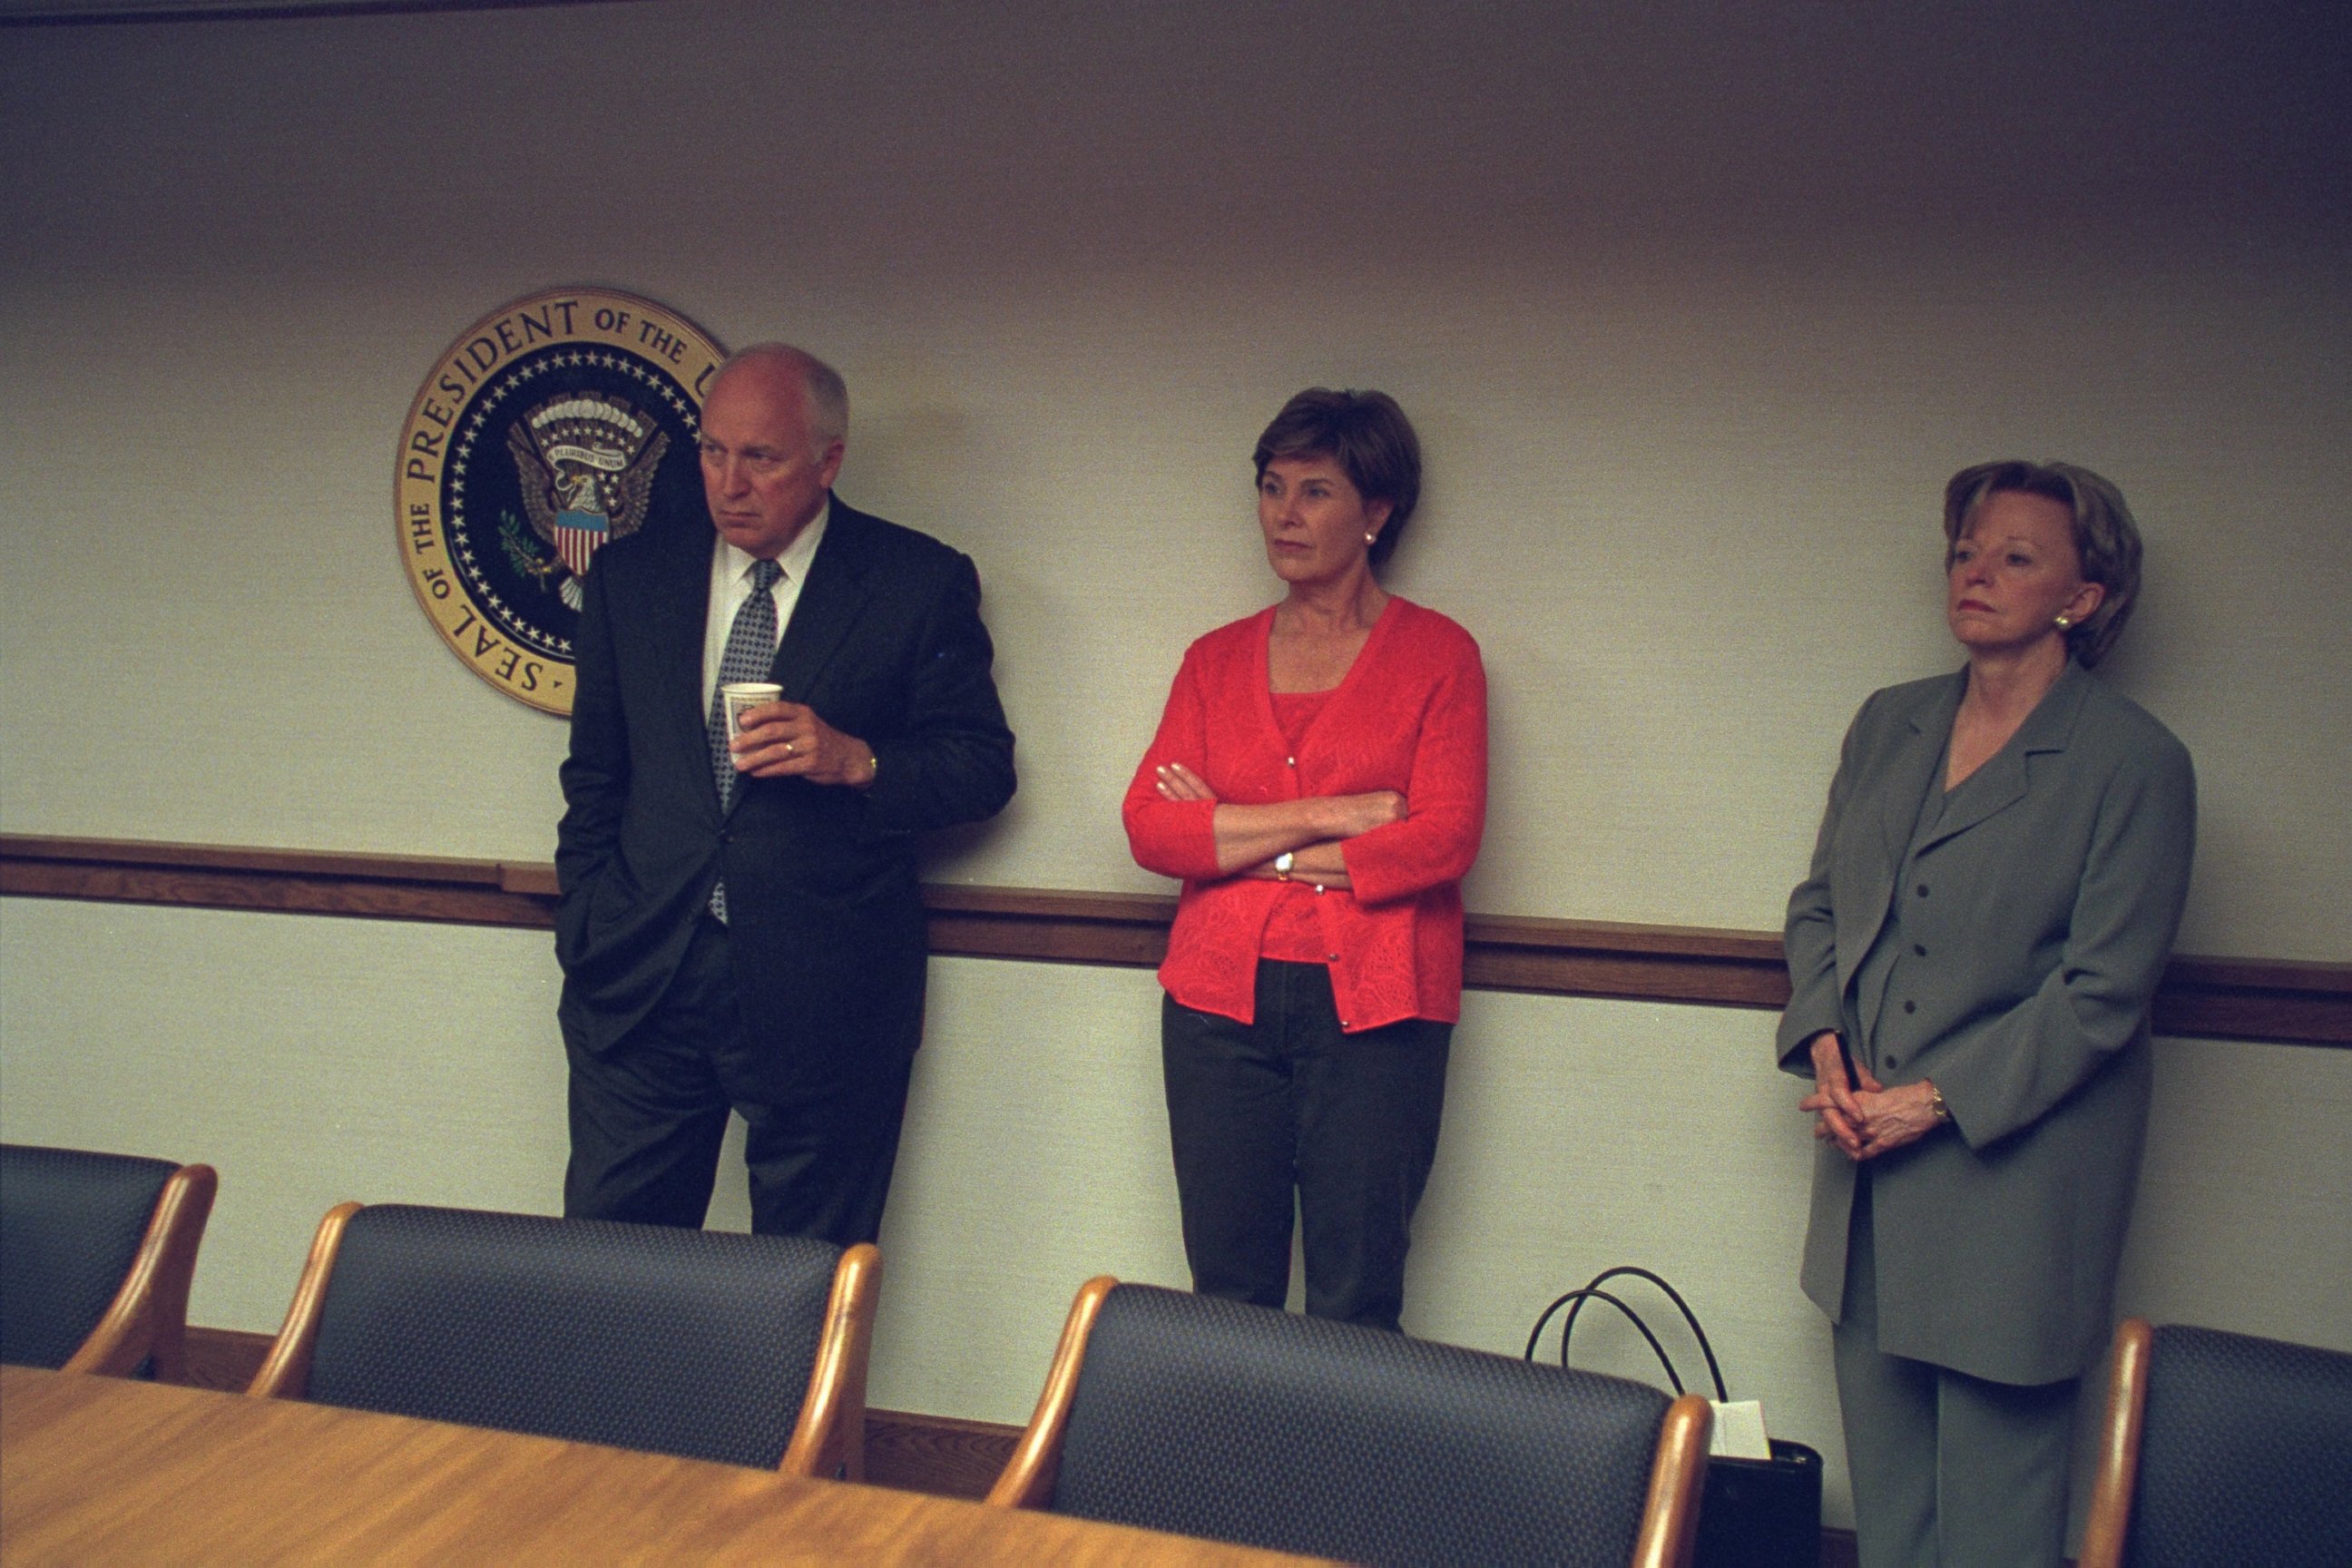 PHOTO: This photo released by the U.S. National Archives shows Vice President Cheney with Laura Bush and Lynne Cheney on September 11, 2001.